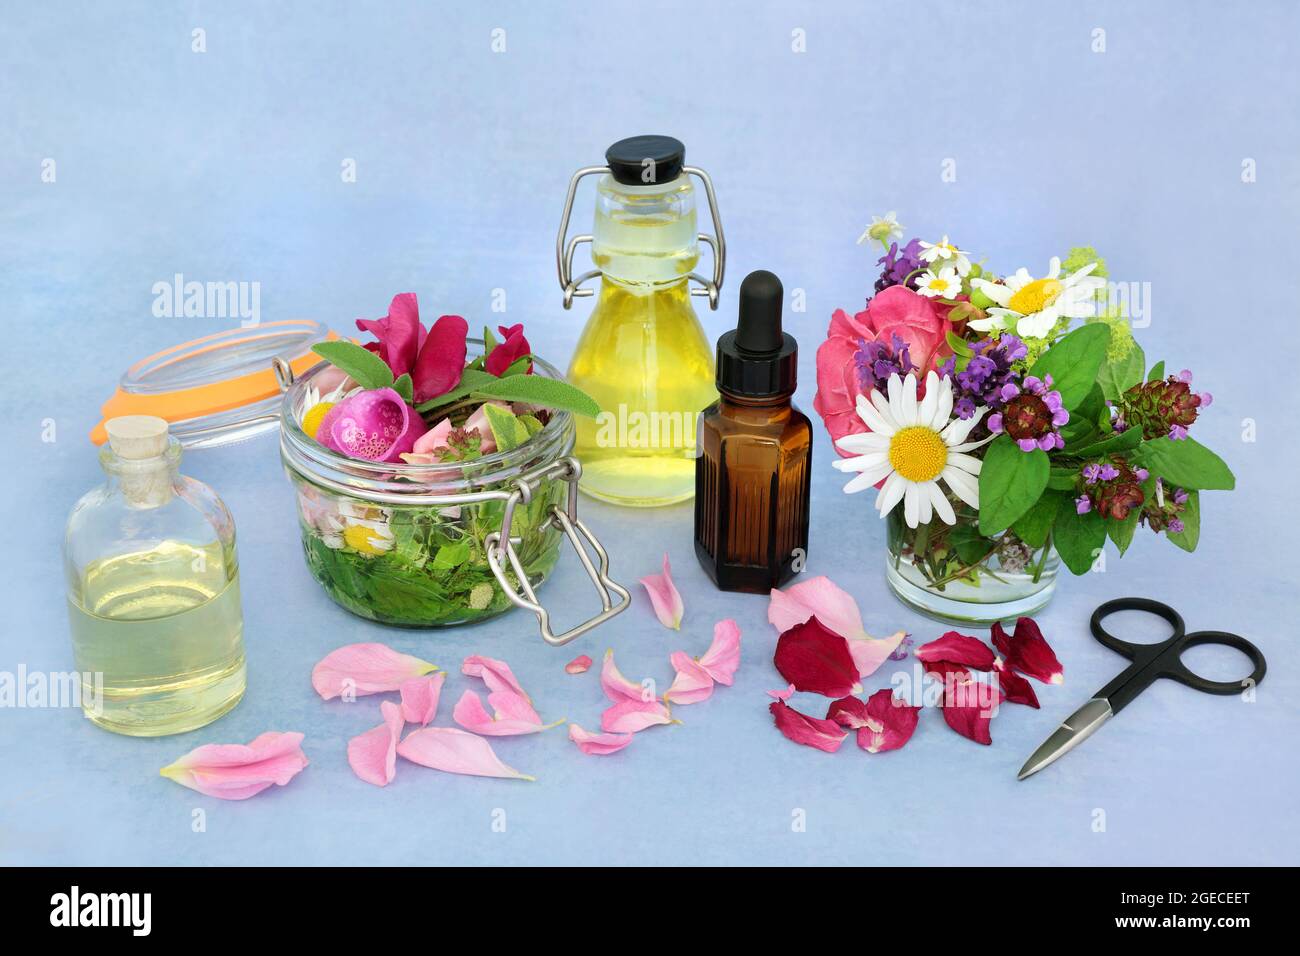 Aromatherapy essential oil preparation with summer herbs and flowers for oil infusions. Health care concept for naturopathic herbal plant medicine. Stock Photo